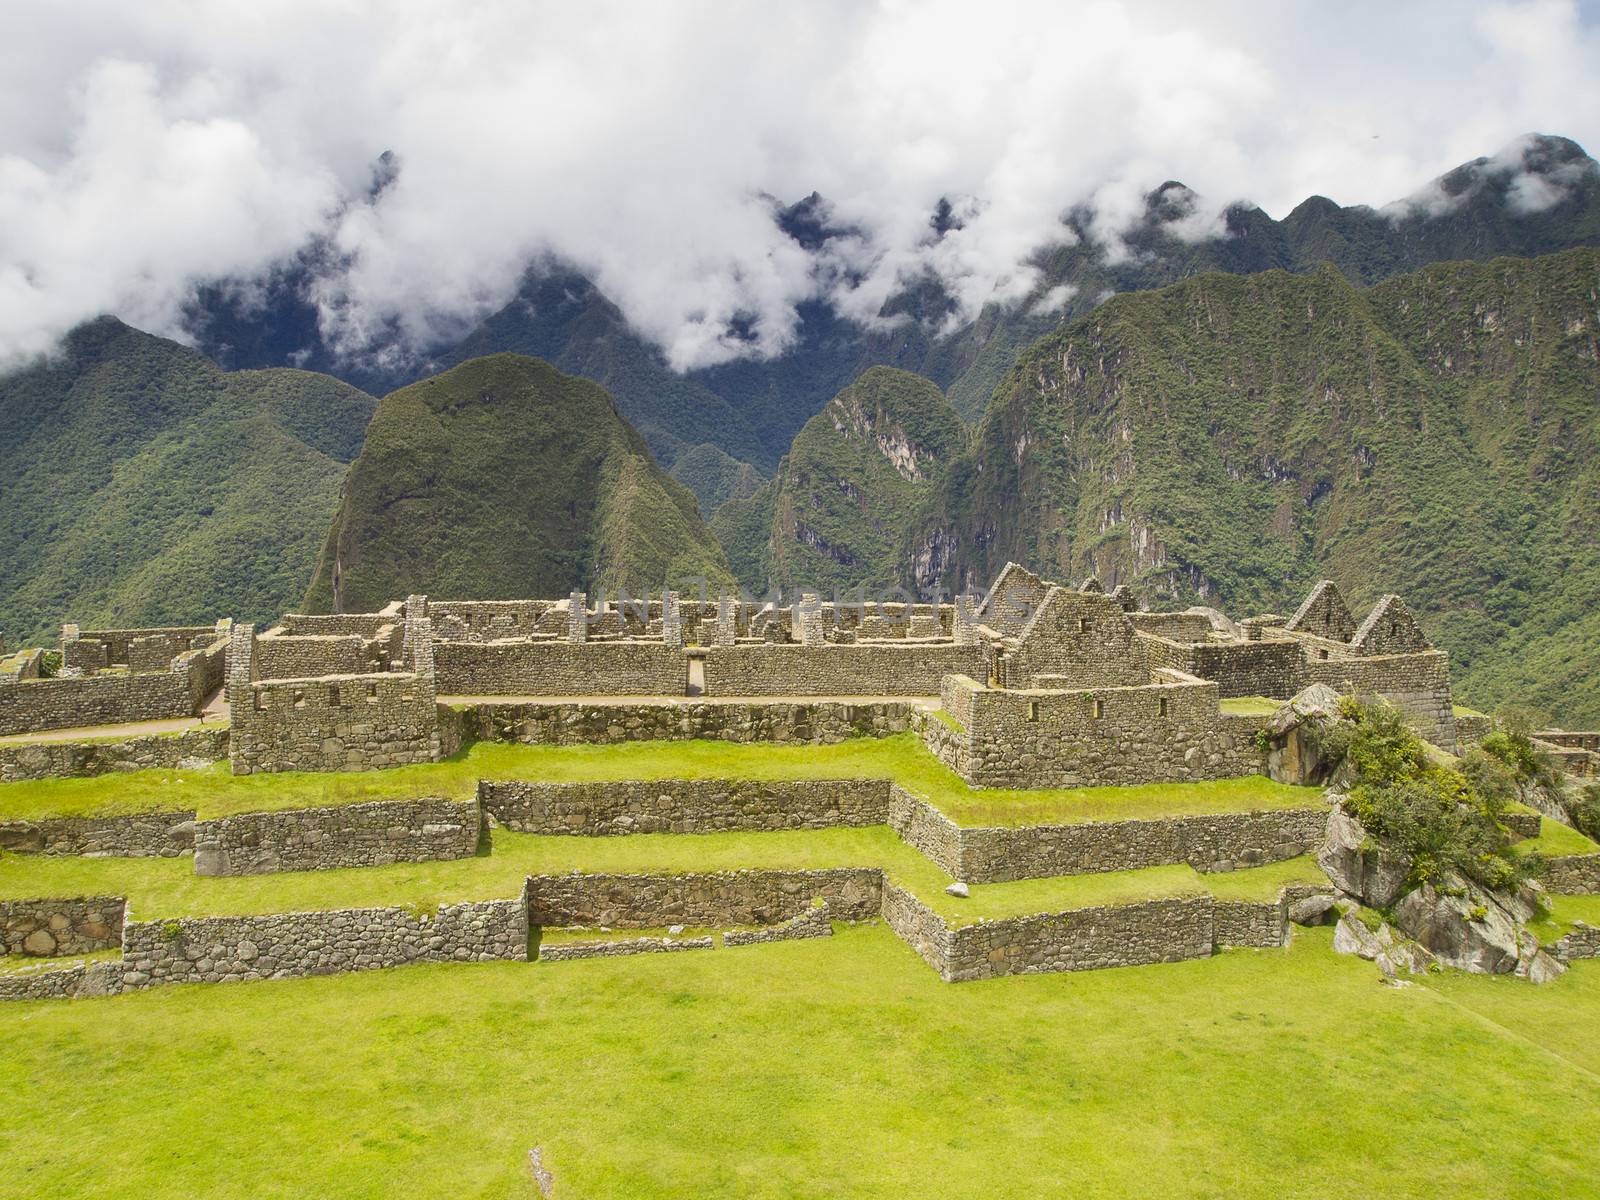 Ruins Buildings in Machu Picchu - Mysterious city and archaeological site of pre-Columbian civilization of the Incas on the Andes cordillera mountains archaeology near Cusco, Peru.